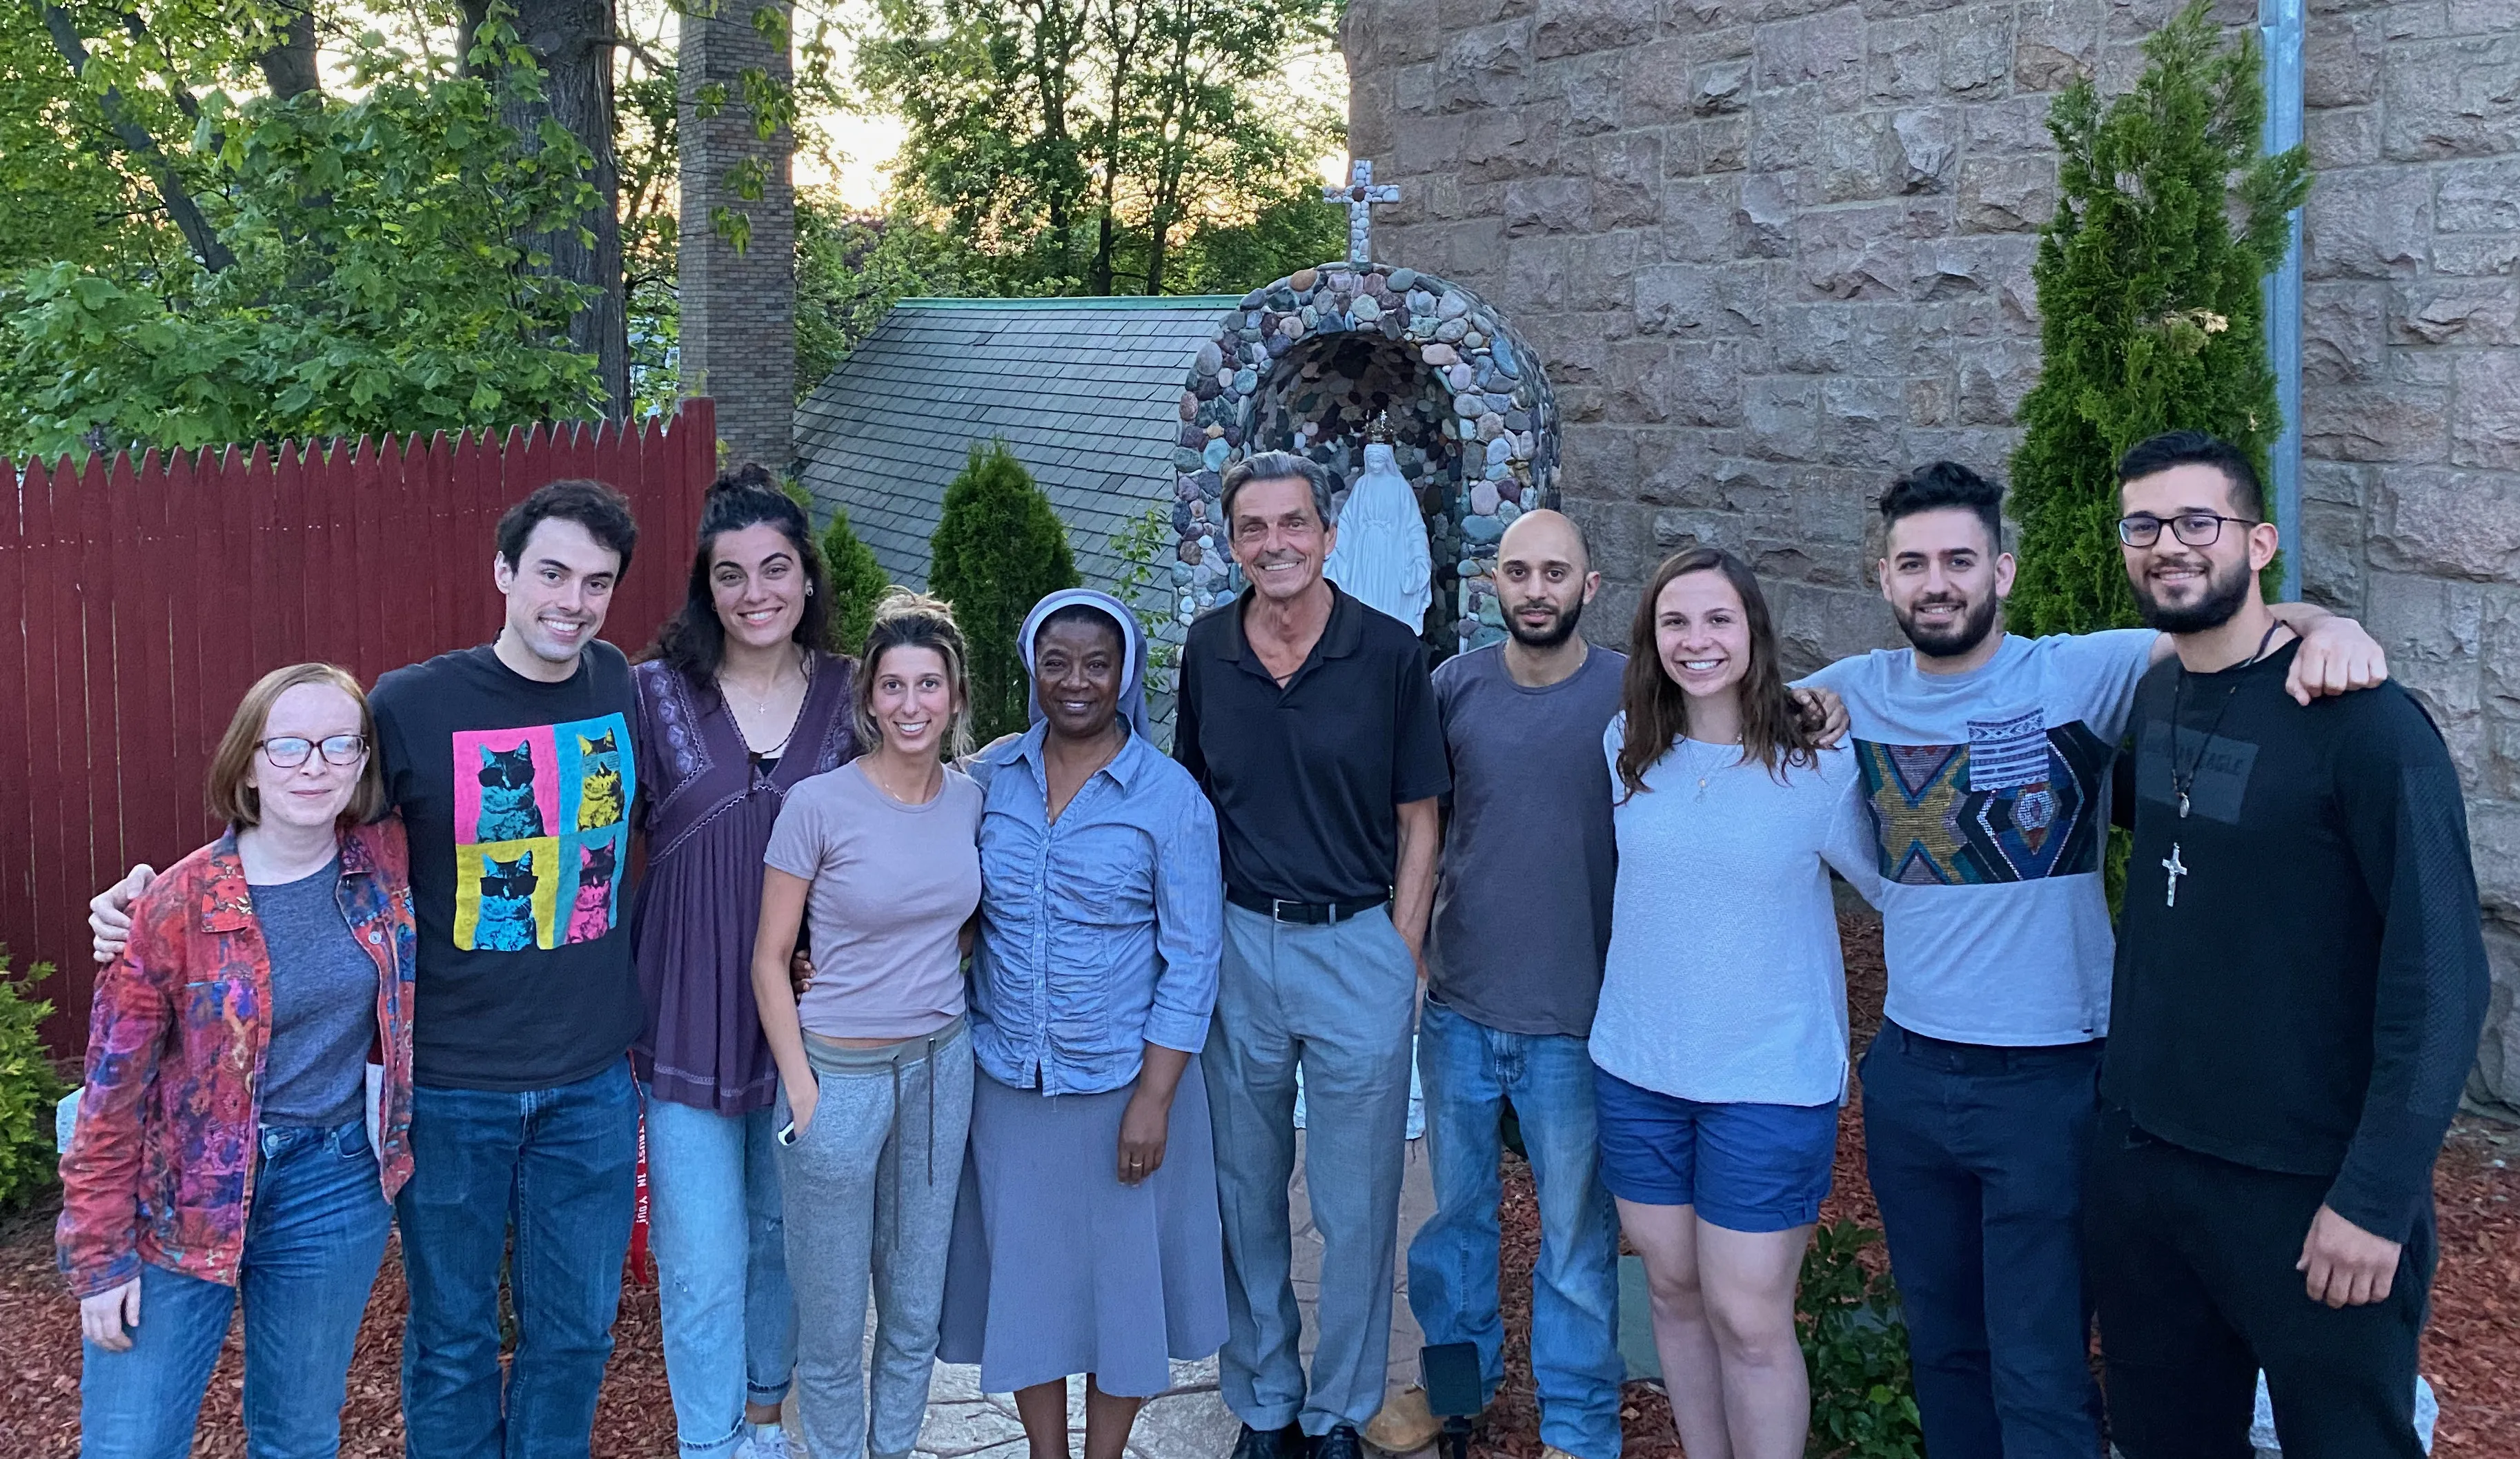 Young adults who have helped with the "I Thirst" project at St. Mary's Catholic Church in Dedham, Massachusetts from left to right: Emily Rittenour, Matthew Marquet, Monet Souza, Natlia Derosa, Sister Josephine Ngama, Lew Uttaro, Gianfranco Derosa, Elizabeth Balzarini, George Matta, Mark Farah.?w=200&h=150